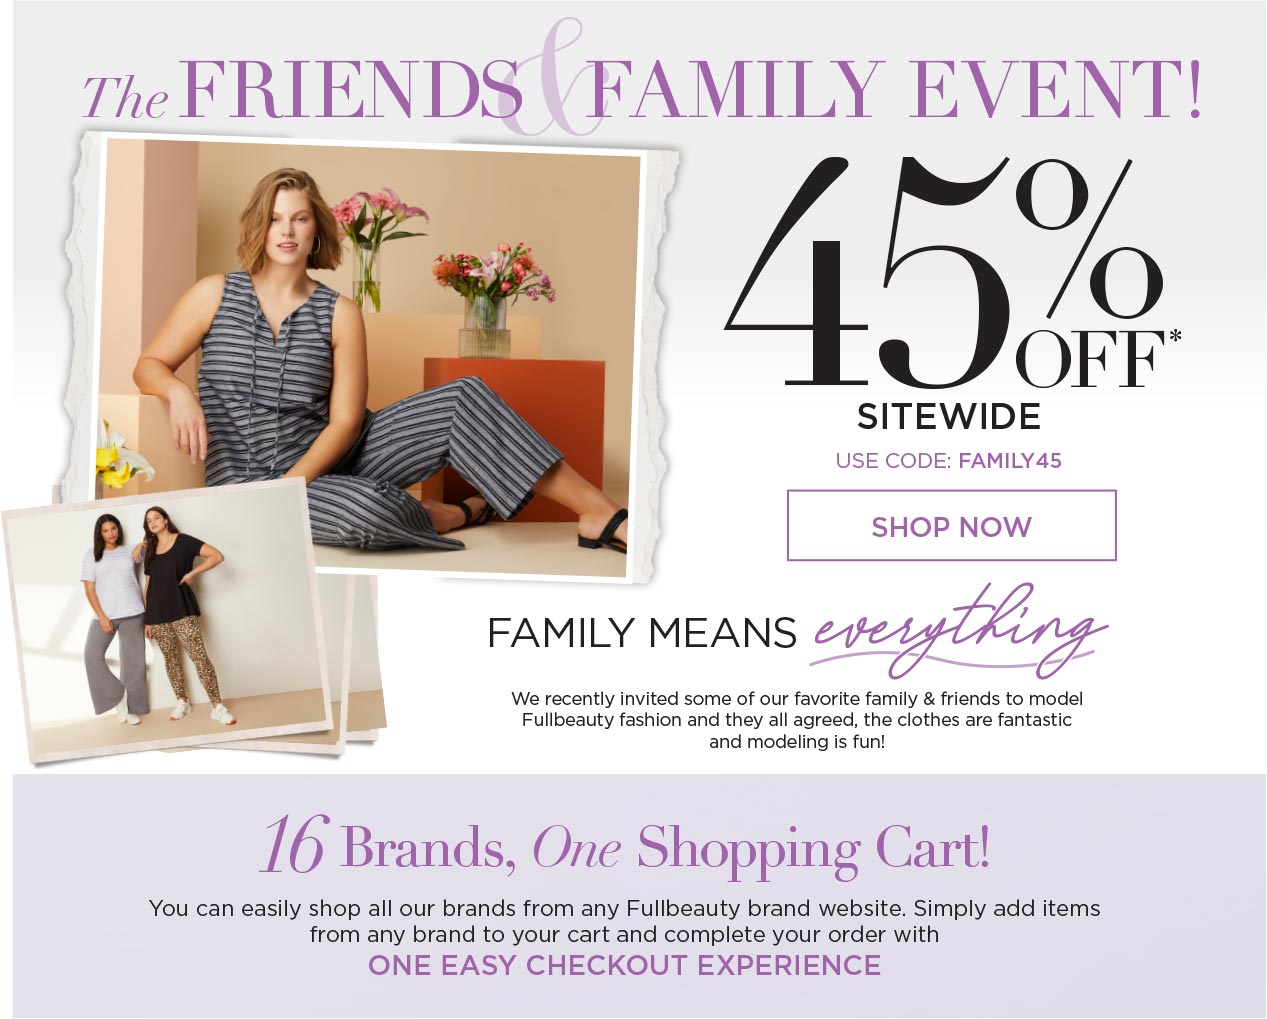 the friends and family event! 45% off* sitewide. Use Code: FAMILY45 - shop now